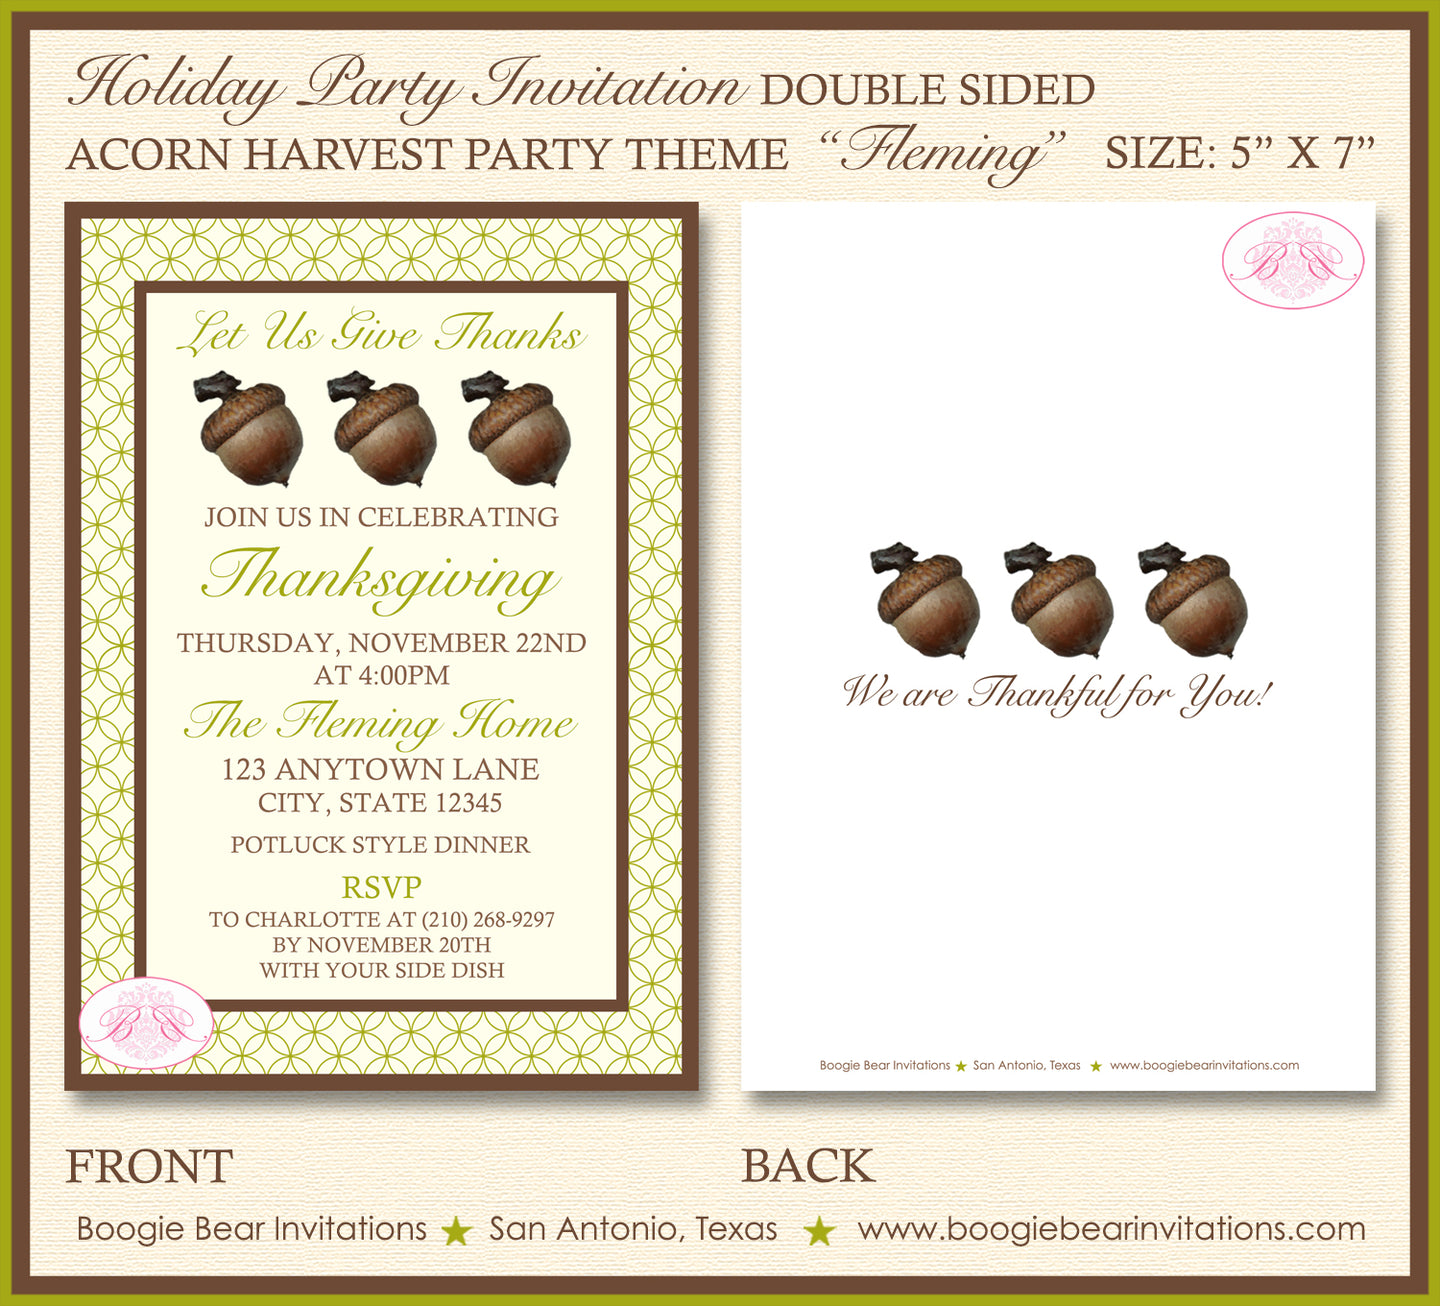 Acorn Thanksgiving Party Invitation Autumn Fall Harvest Green Brown Rustic Boogie Bear Invitations Fleming Theme Paperless Printable Printed